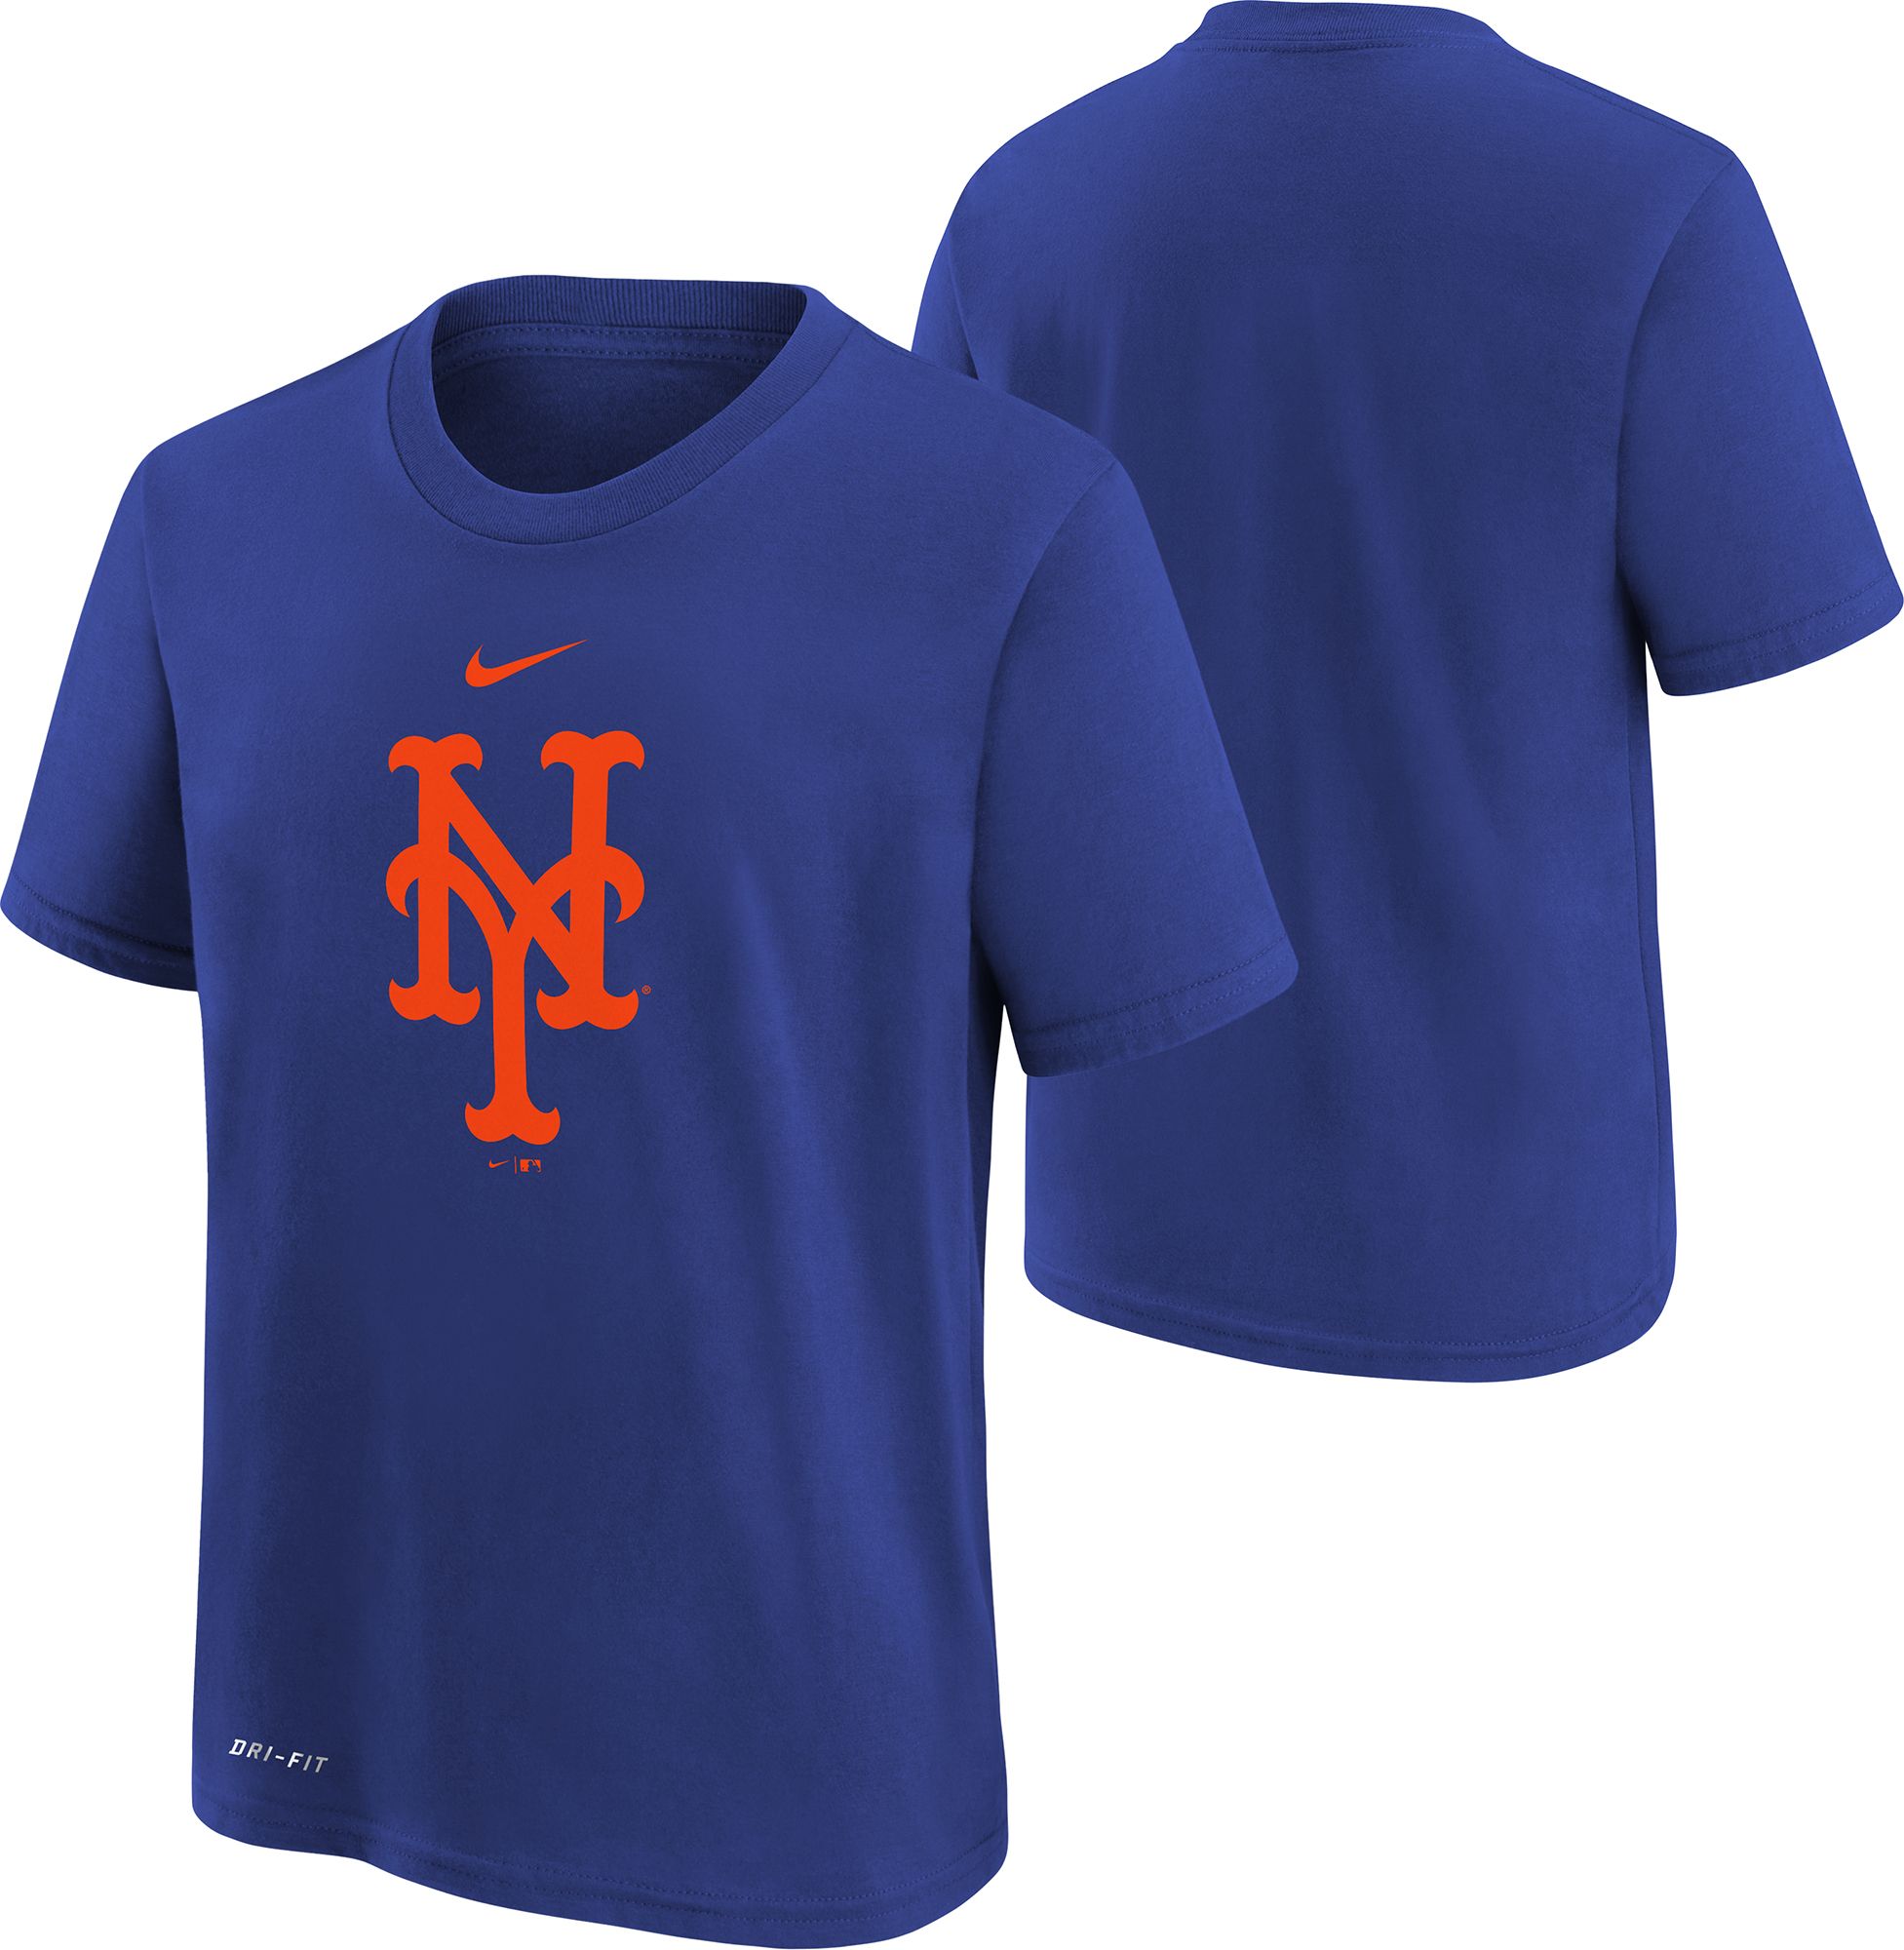 Nike Jacob deGrom NY Mets Youth Home Jersey